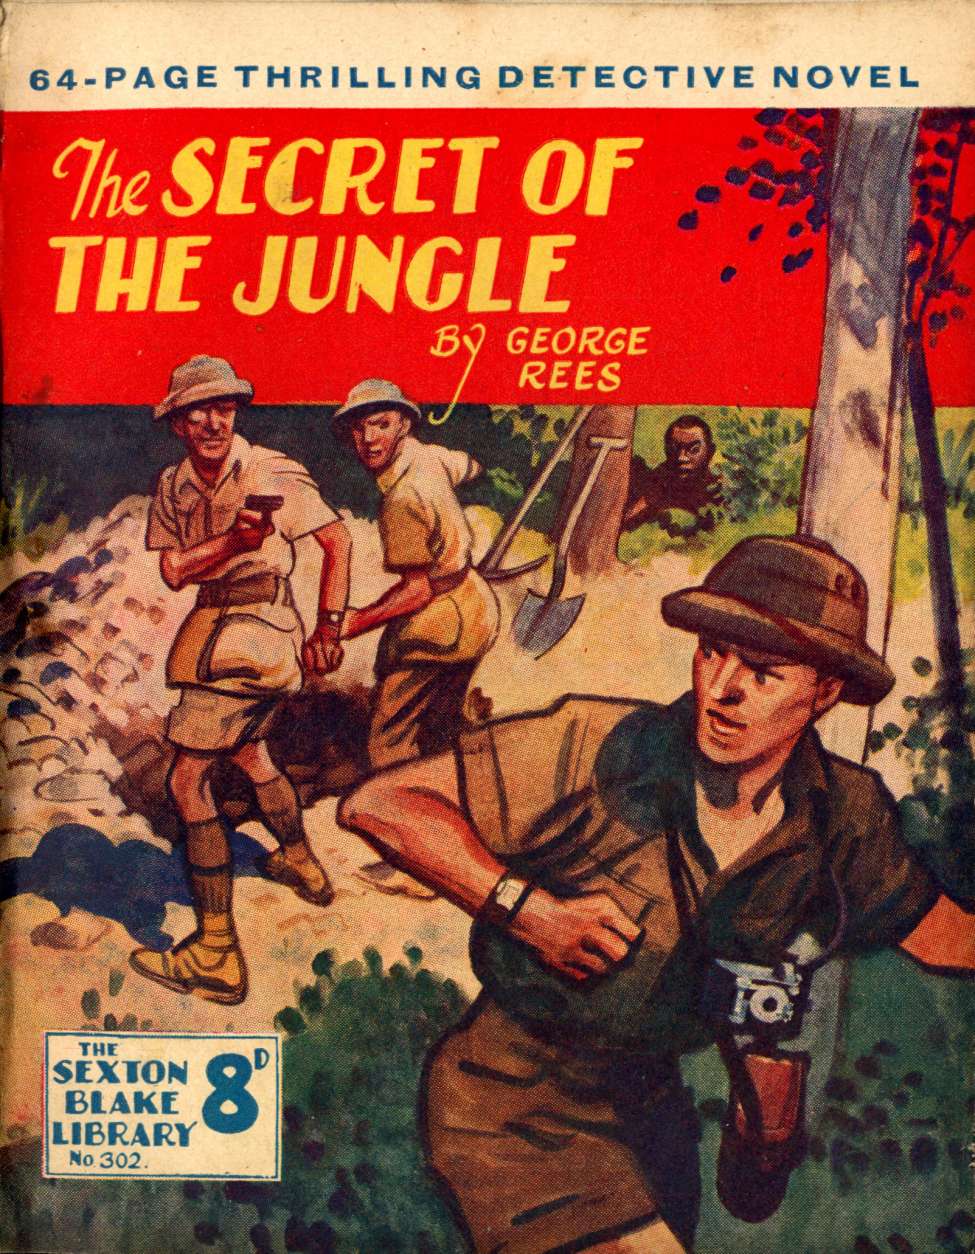 Book Cover For Sexton Blake Library S3 302 - The Secret of the Jungle